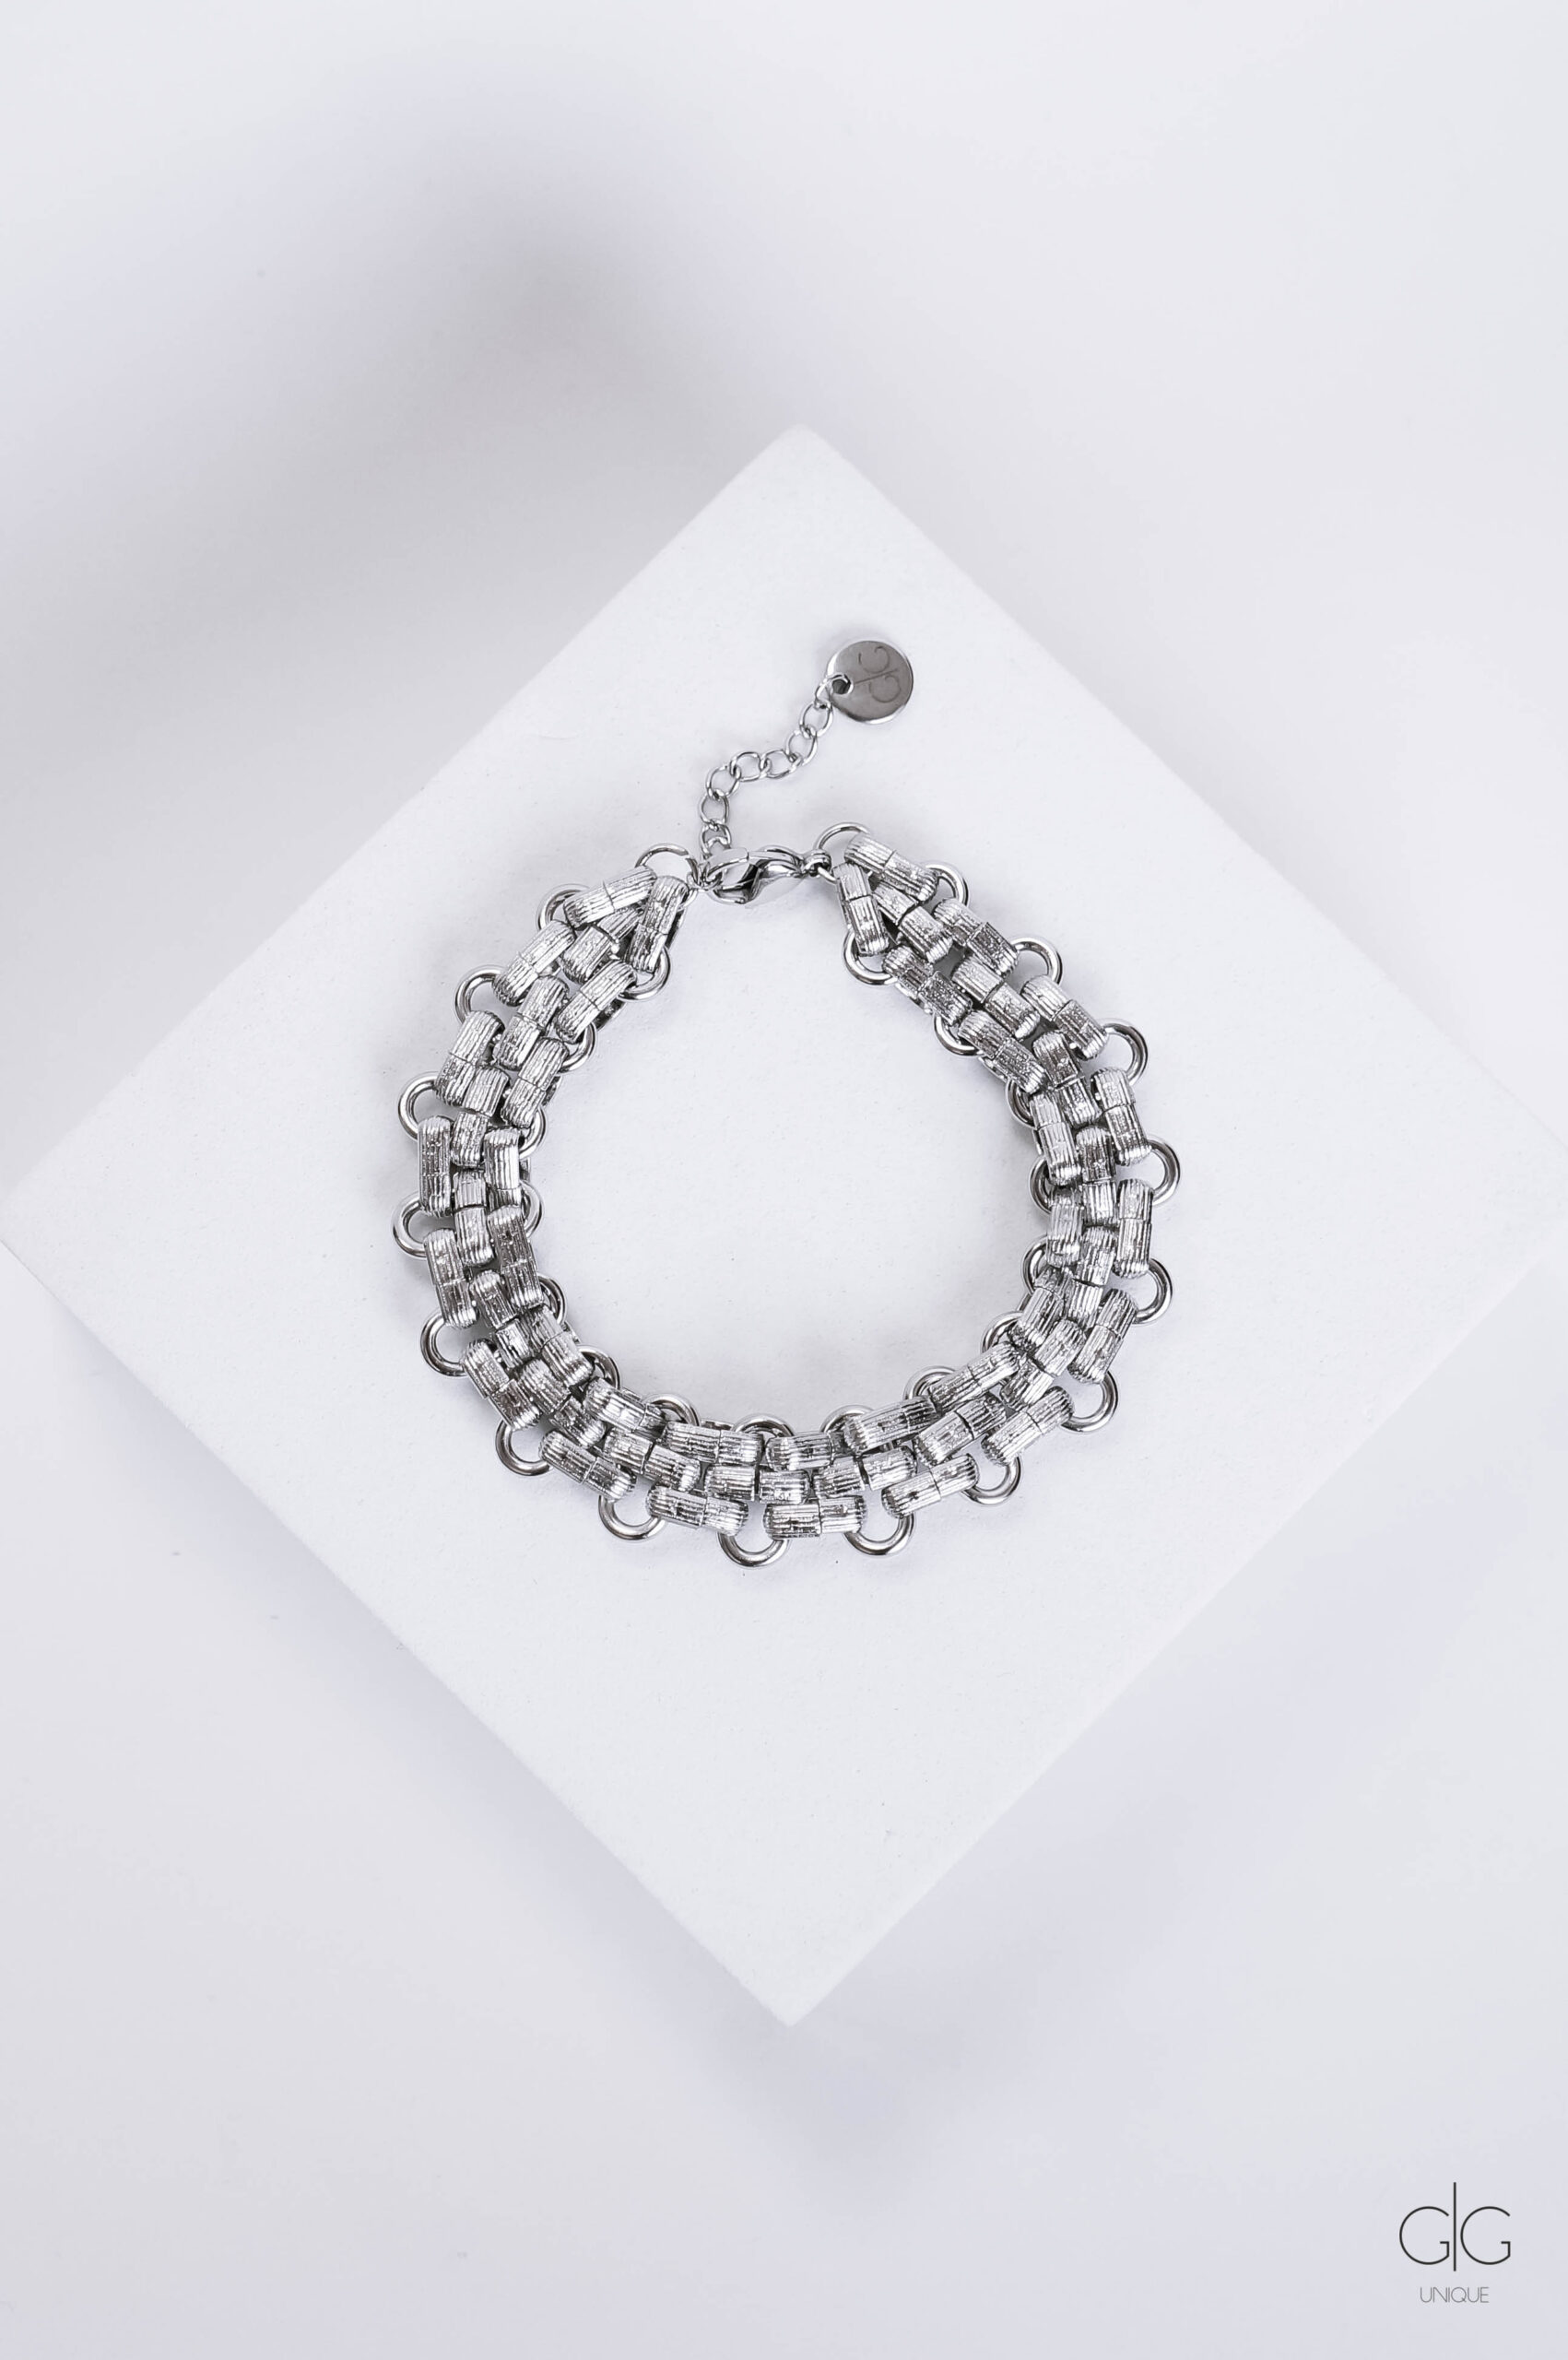 Stylish stainless steel chain bracelet - GG UNIQUE